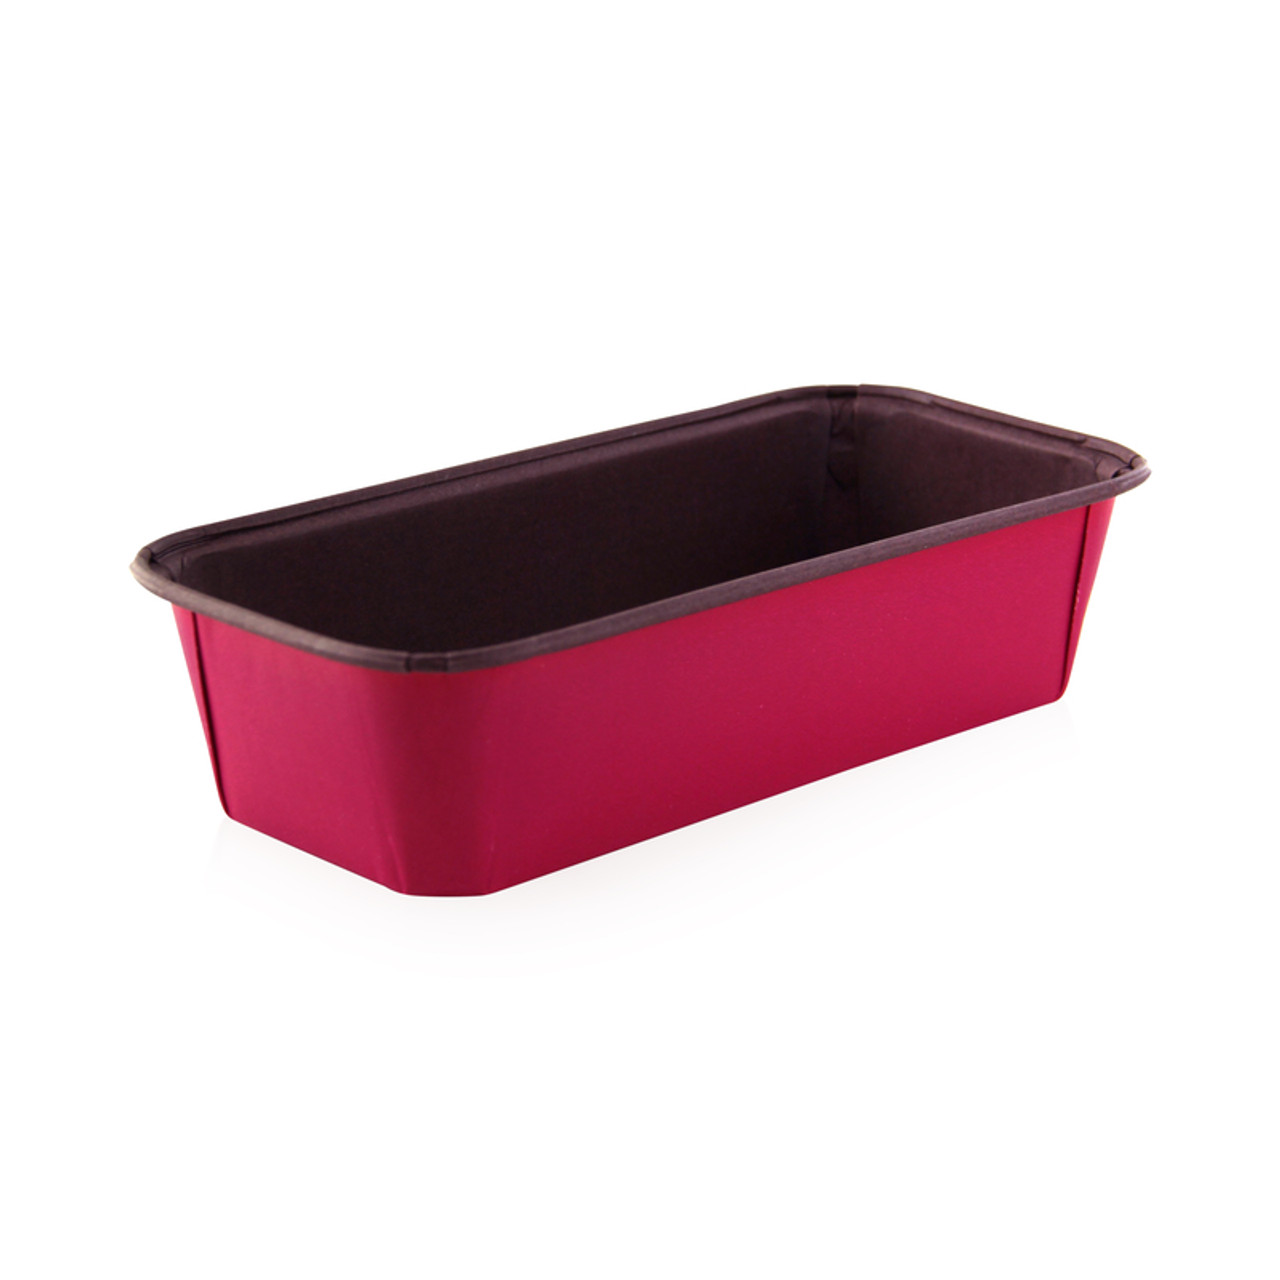 Order a Sample - Free Standing Rectangular Pink Paper Baking Mold 25oz L:6.3 x W:2.5 x H:2in